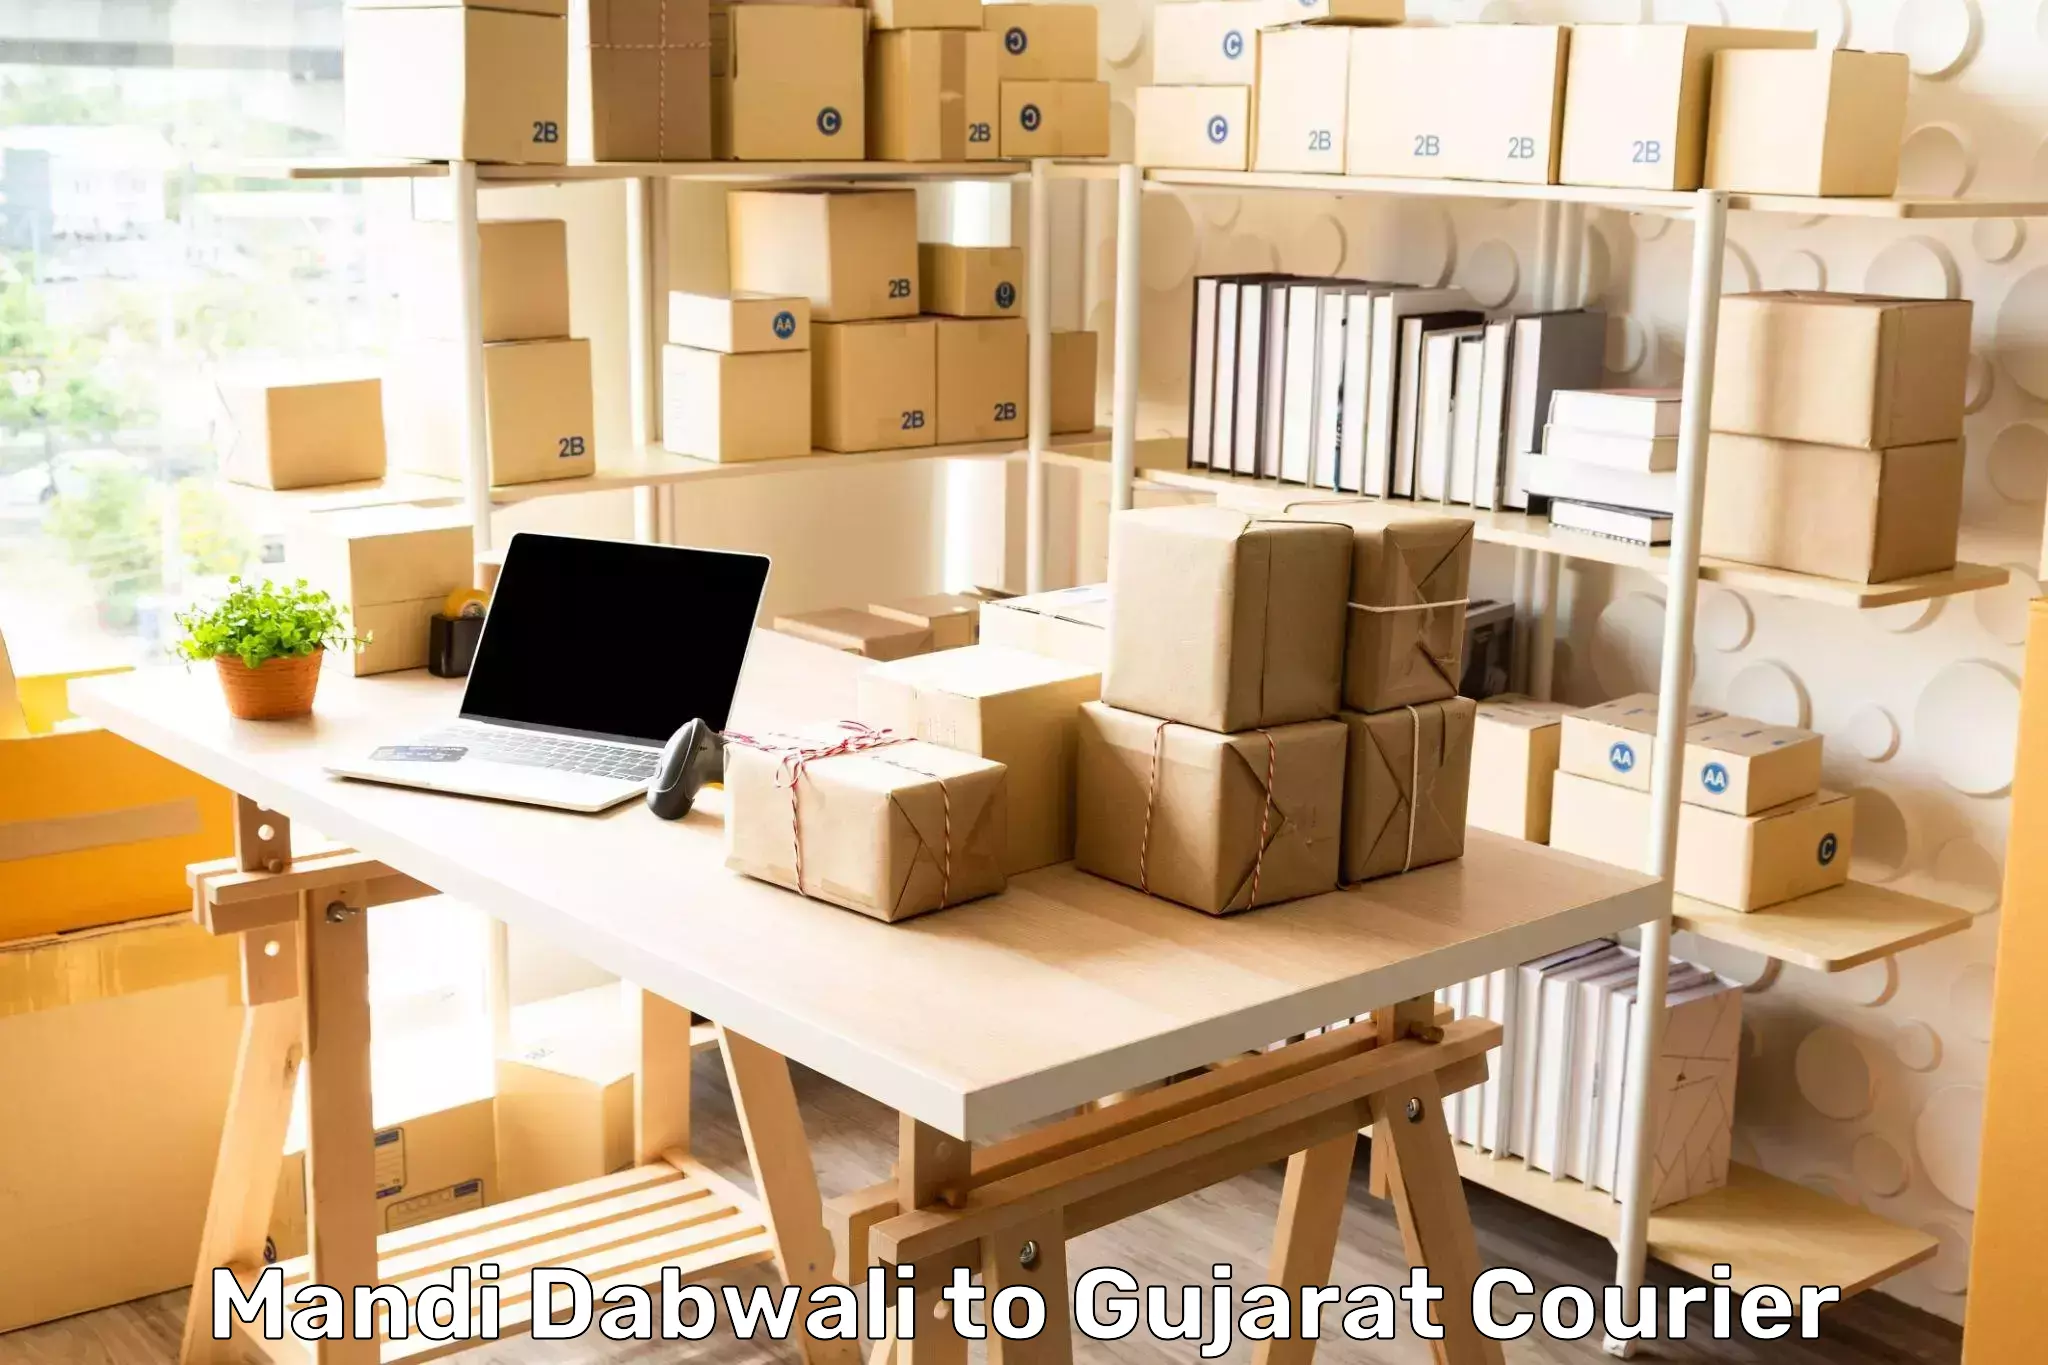 Automated parcel services Mandi Dabwali to Madhavpur